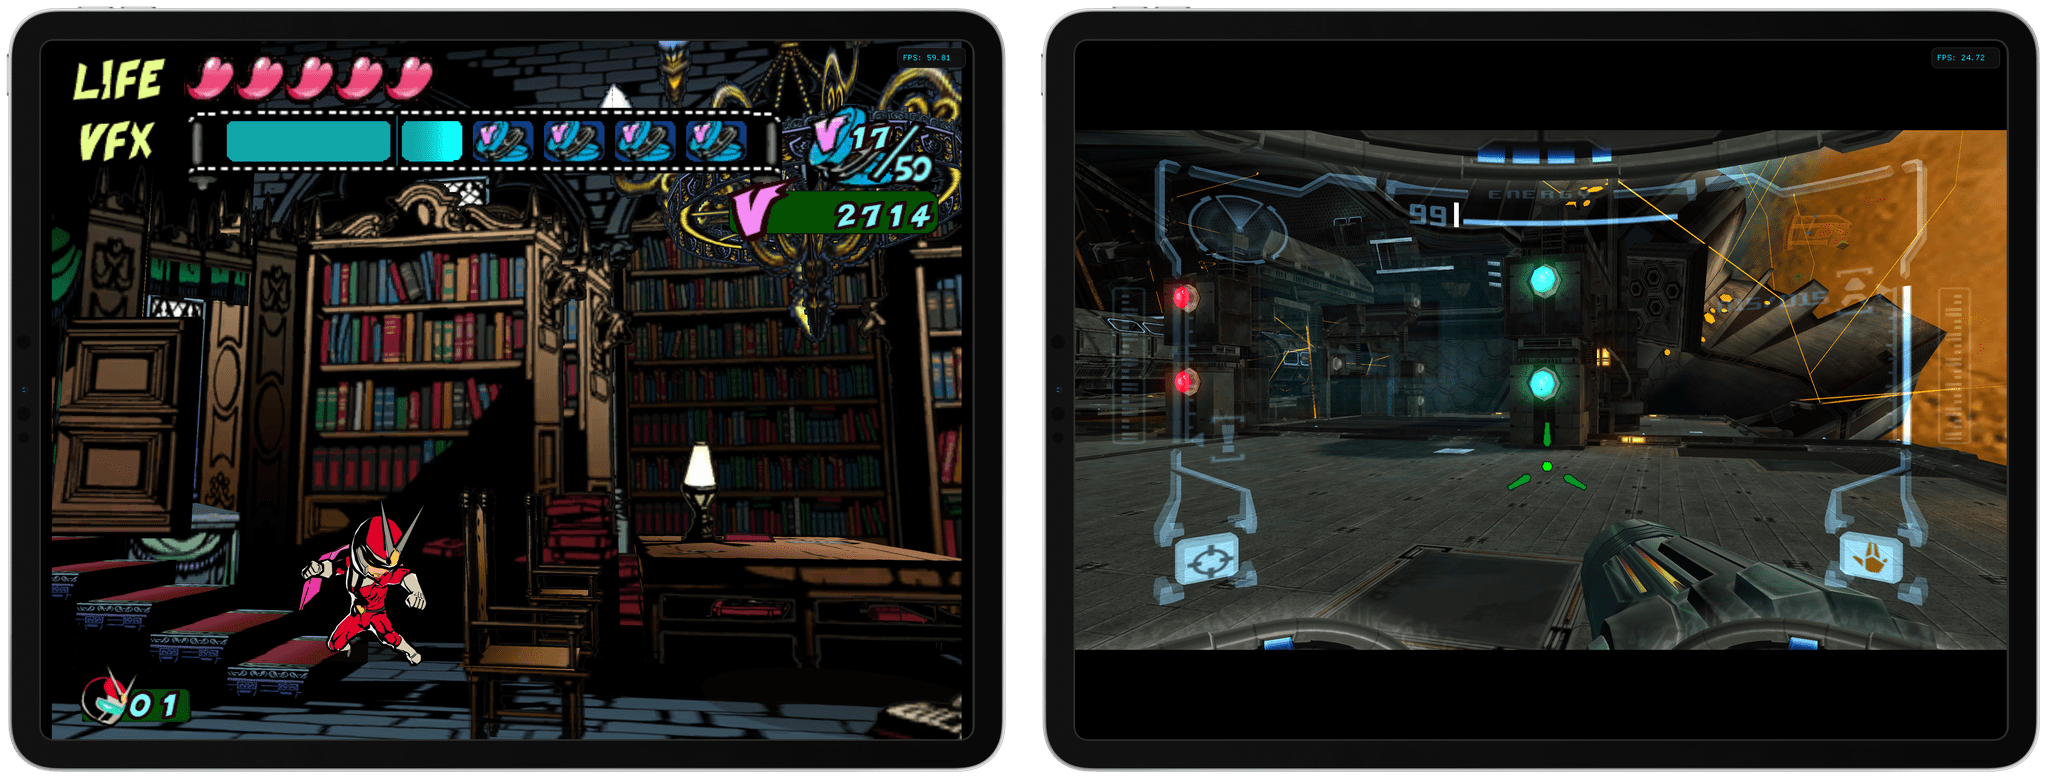 Viewtiful Joe and Metroid Prime running in DolphiniOS on my iPad Pro. Both games occasionally drop to 30fps, but playing them at 4K is amazing regardless.